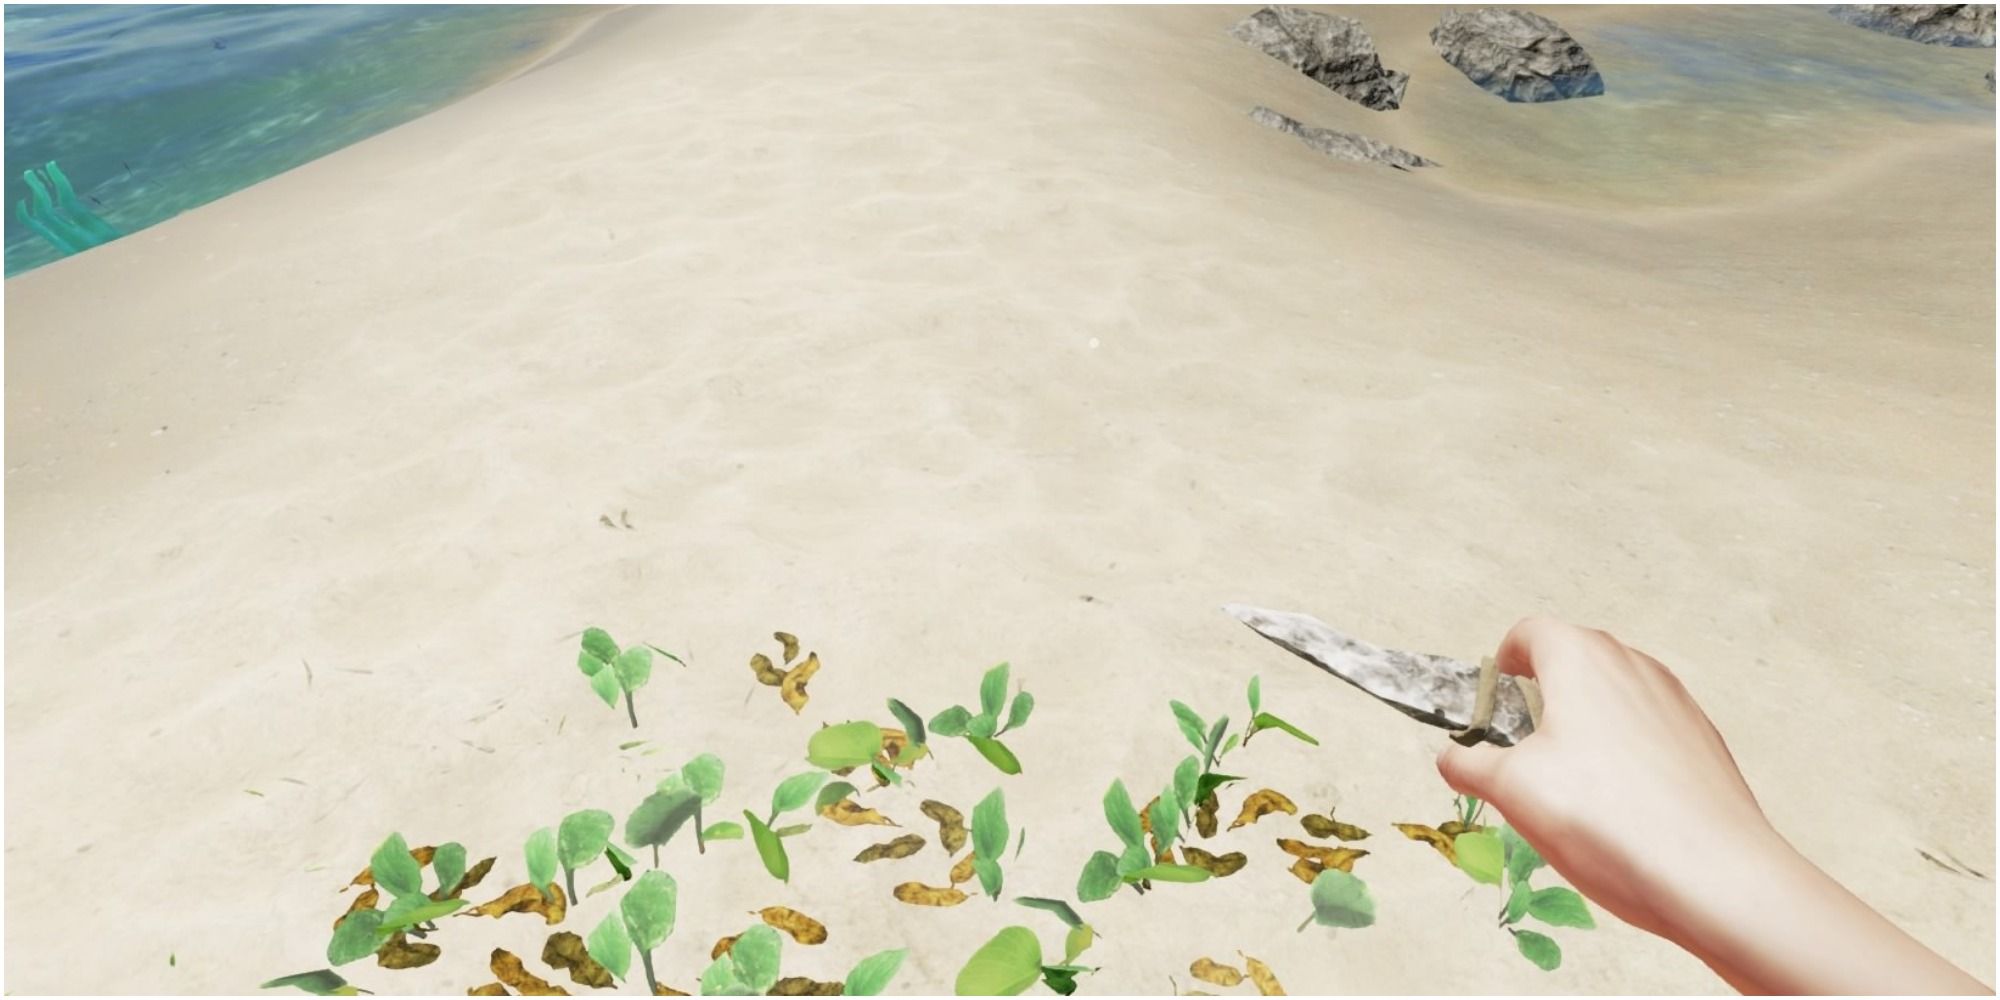 How To Make Lashing in Stranded Deep